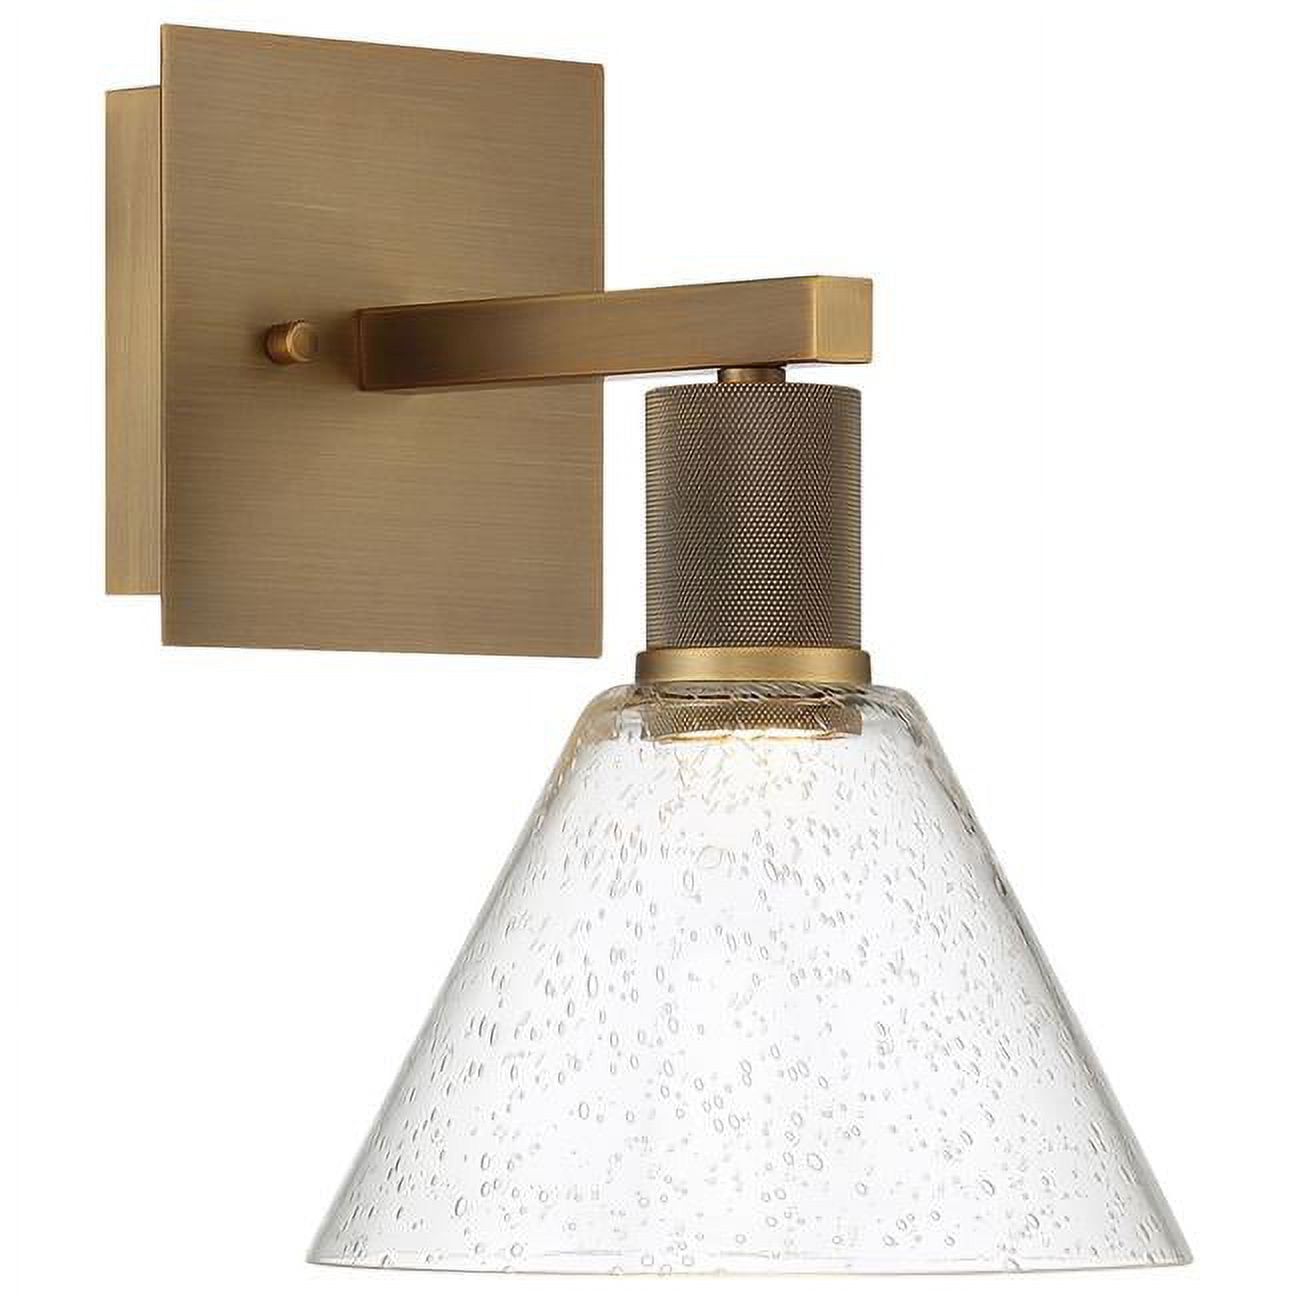 Picture of Access Lighting 63143LEDD-ABB-SDG 8 in. Port Nine 1 Light LED Wall Sconce Wall Light, Martini - Antique Brushed Brass - Seeded Glass